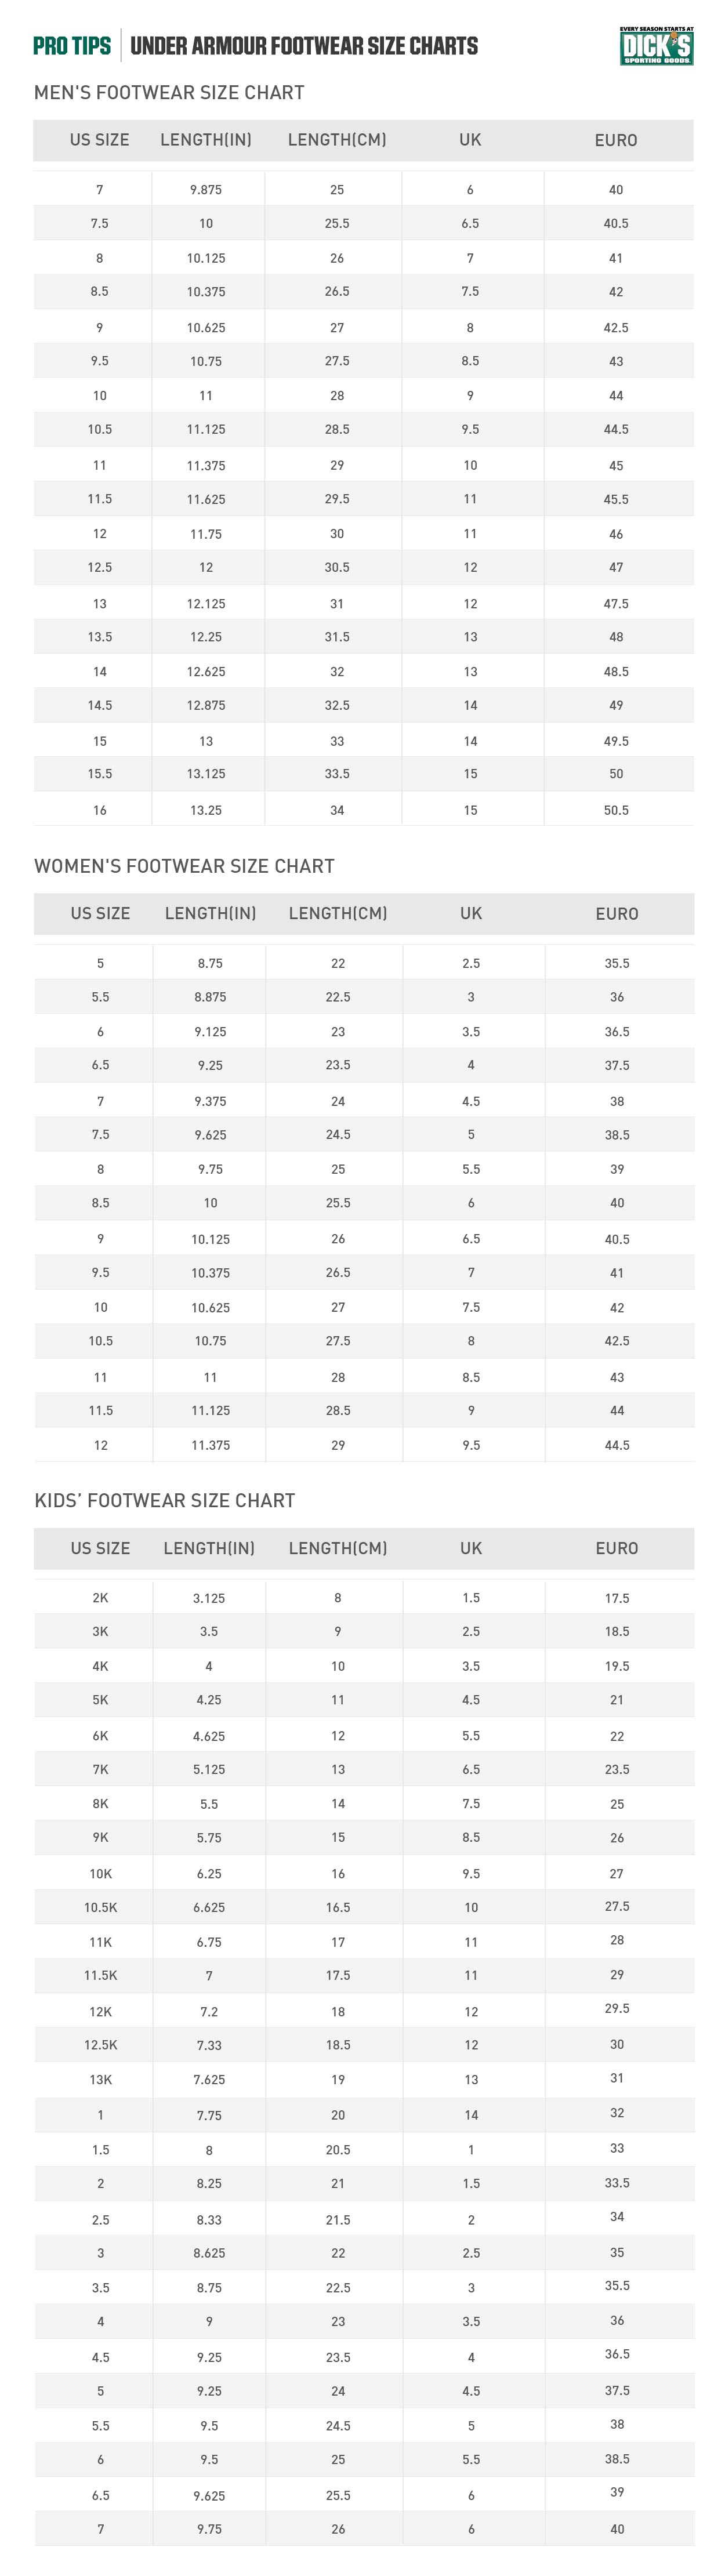 inyectar contaminación Cercanamente Under Armour® Footwear Size Charts | PRO TIPS by DICK'S Sporting Goods